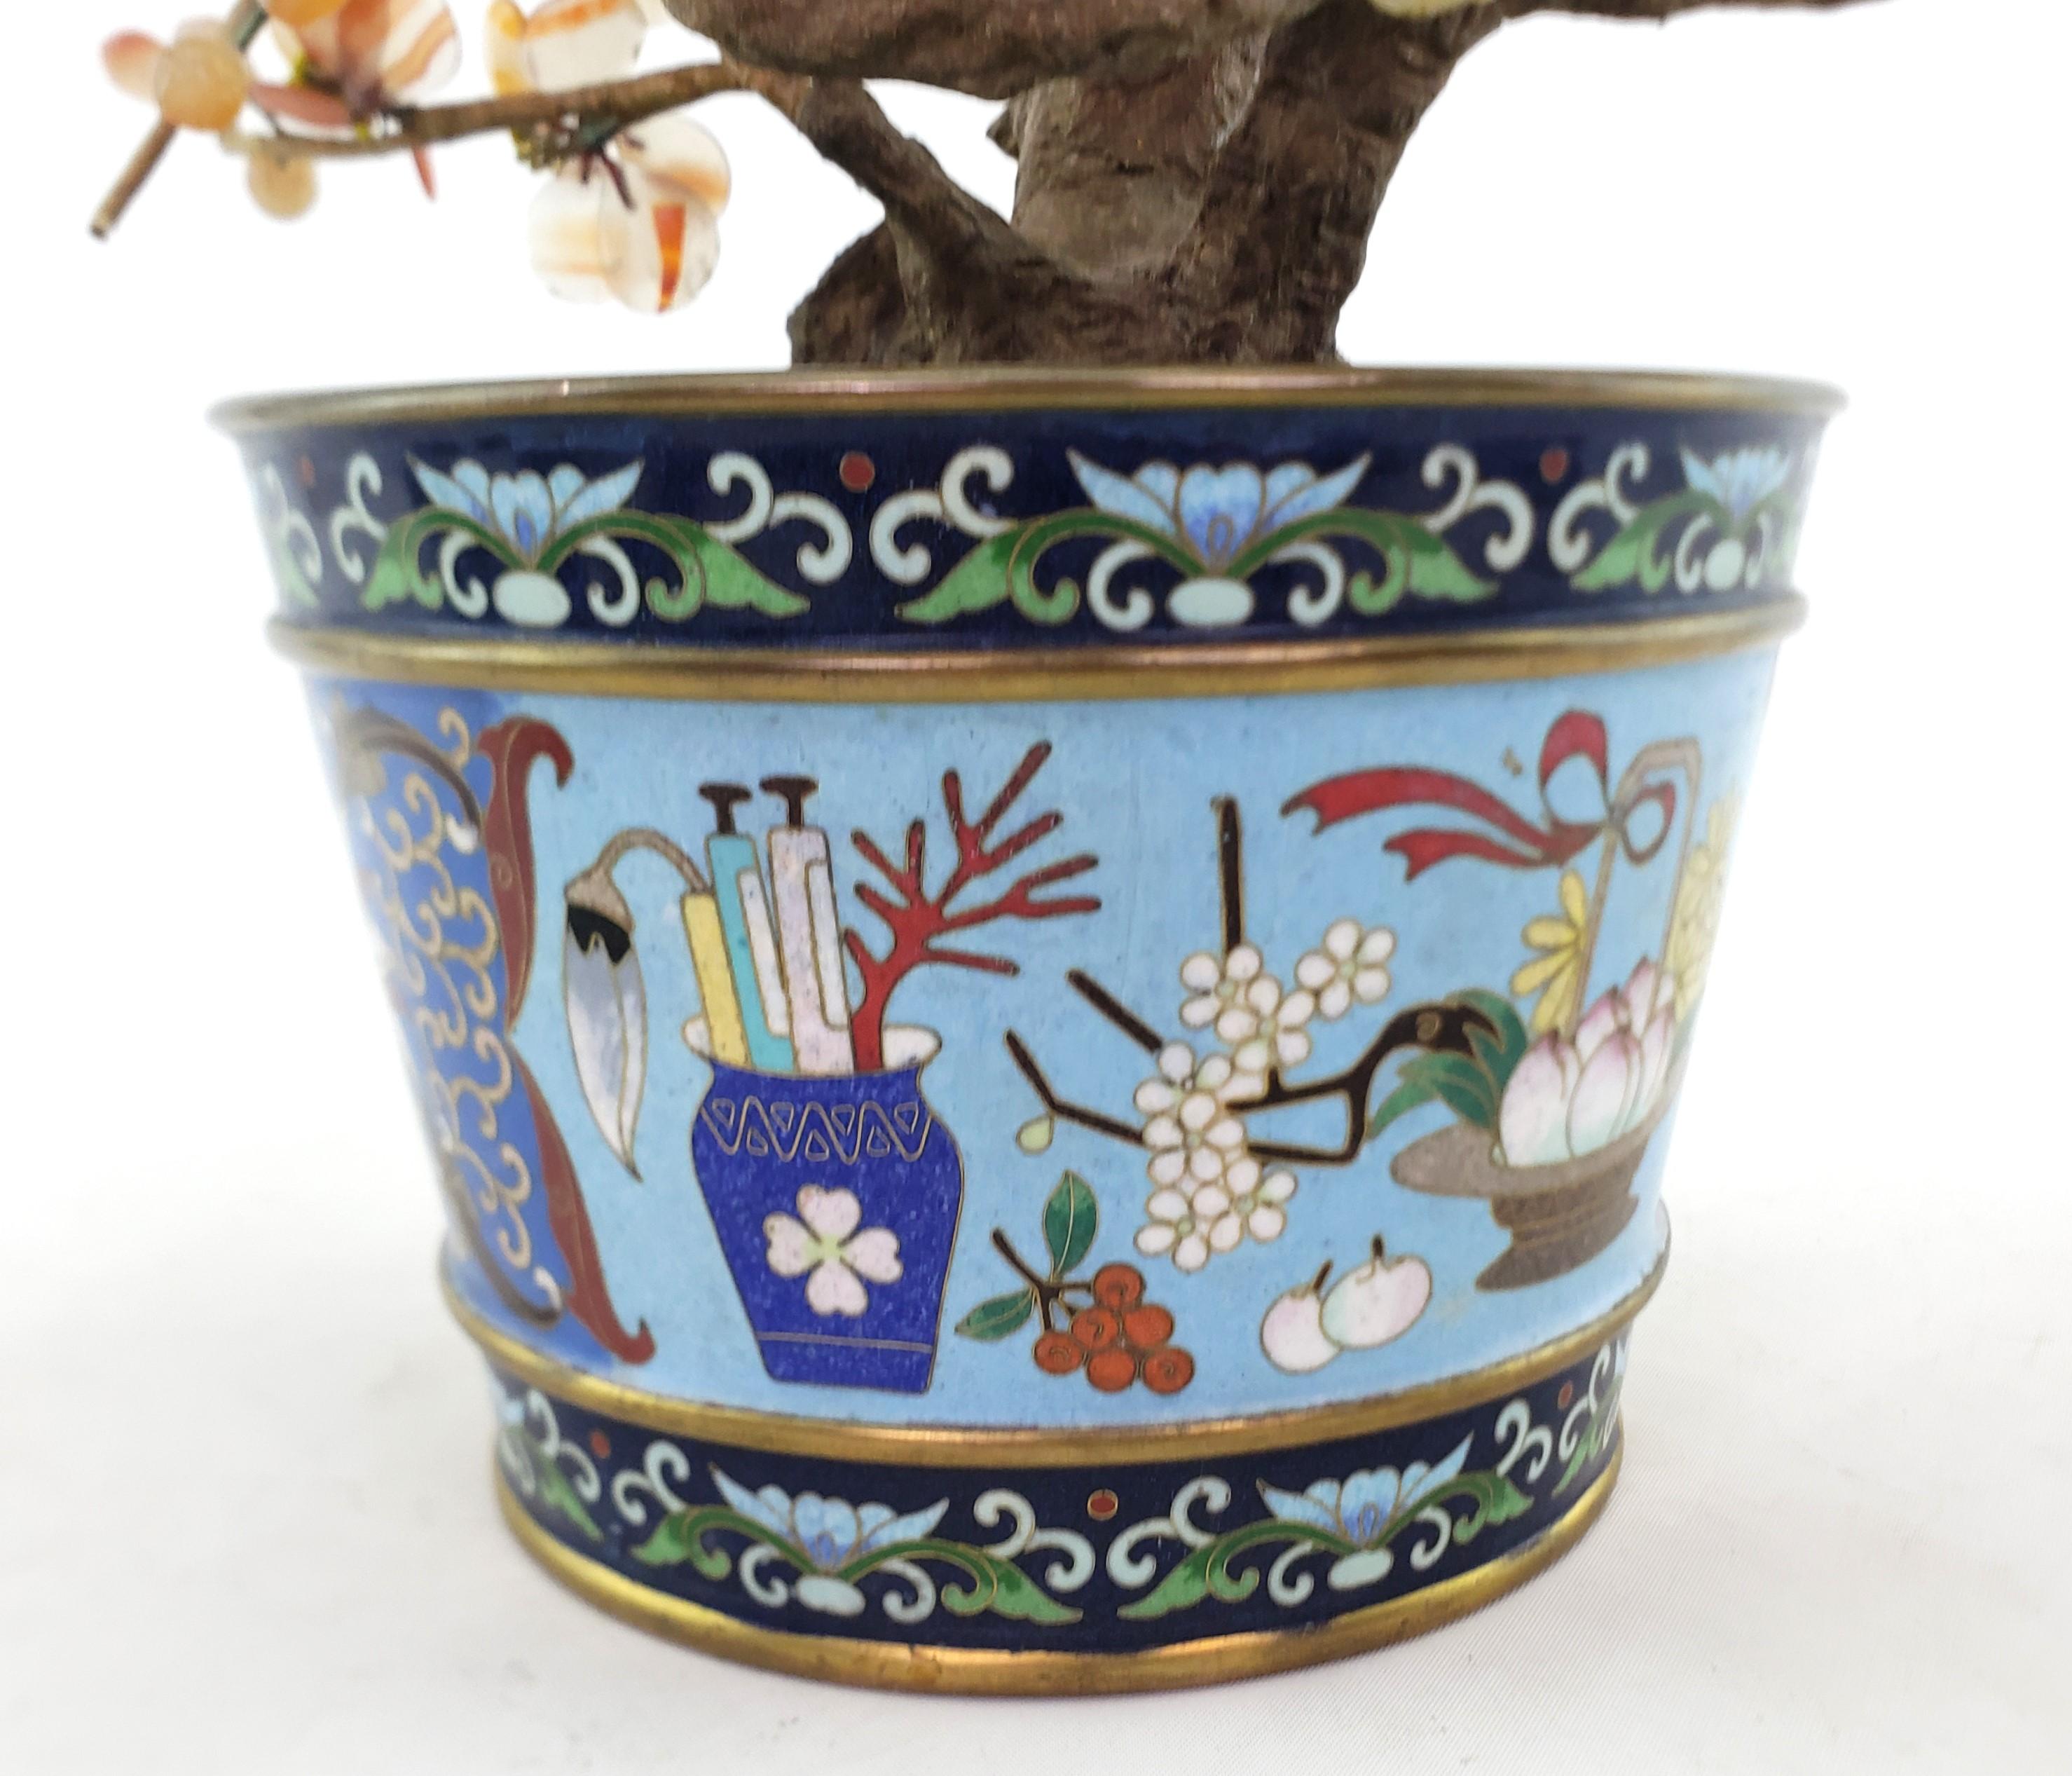 Antique Chinese Bonzai Styled Flowering Fruit Tree Sculpture with Cloisonne Pot For Sale 5